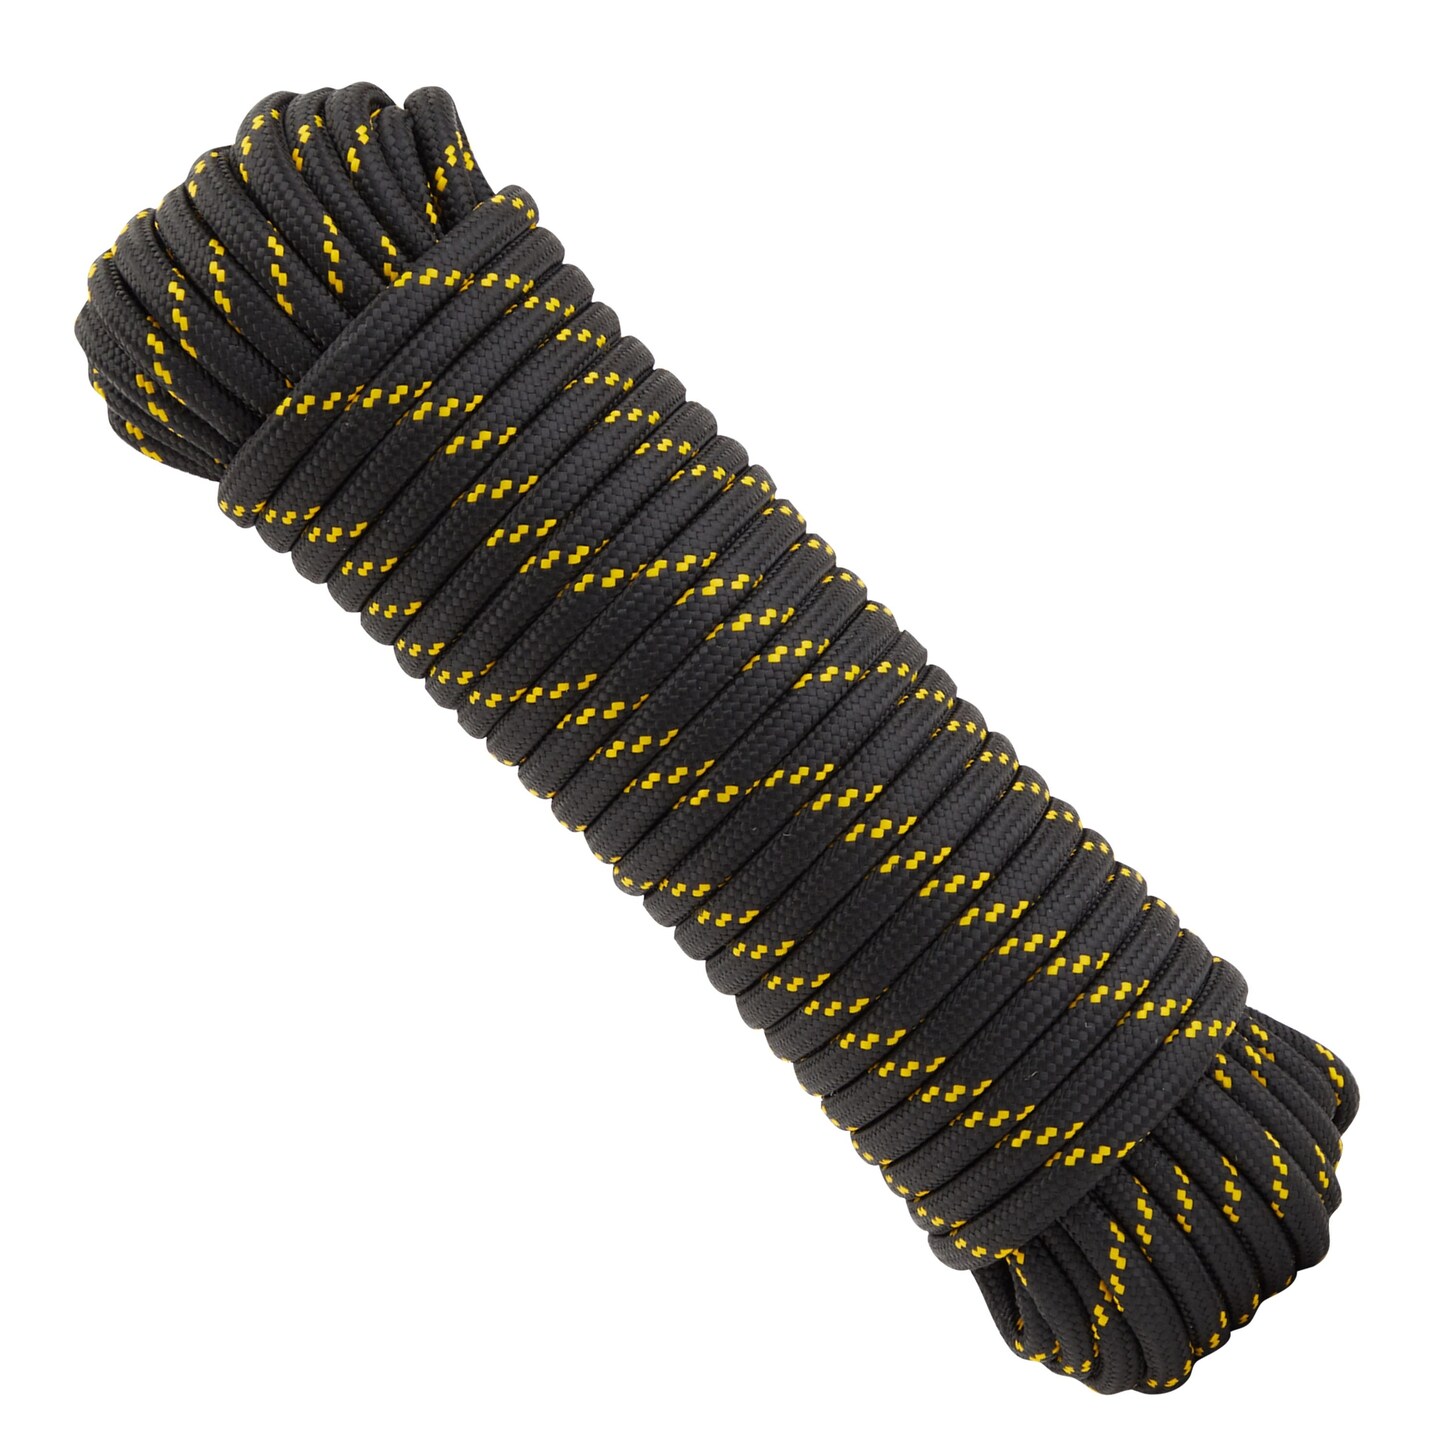 1/2 Inch Braided Polypropylene Rope, 100 Ft Tie Down Utility Cord